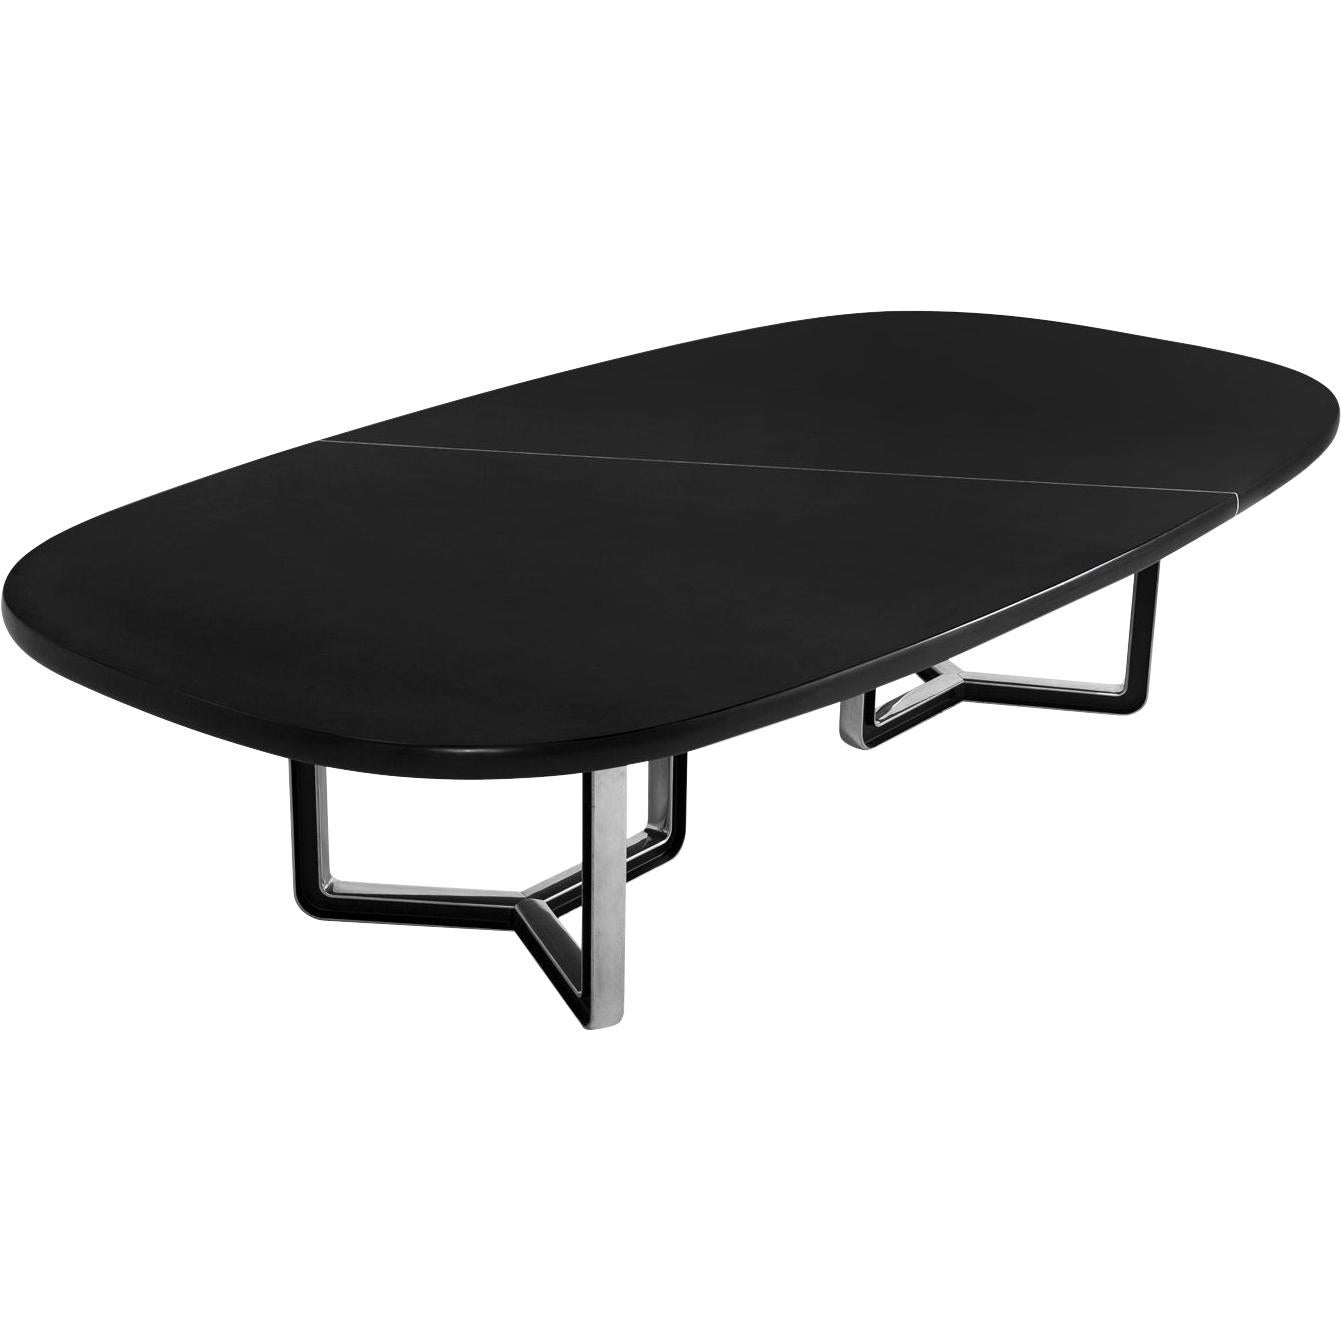 Tecno Large Black Conference Table